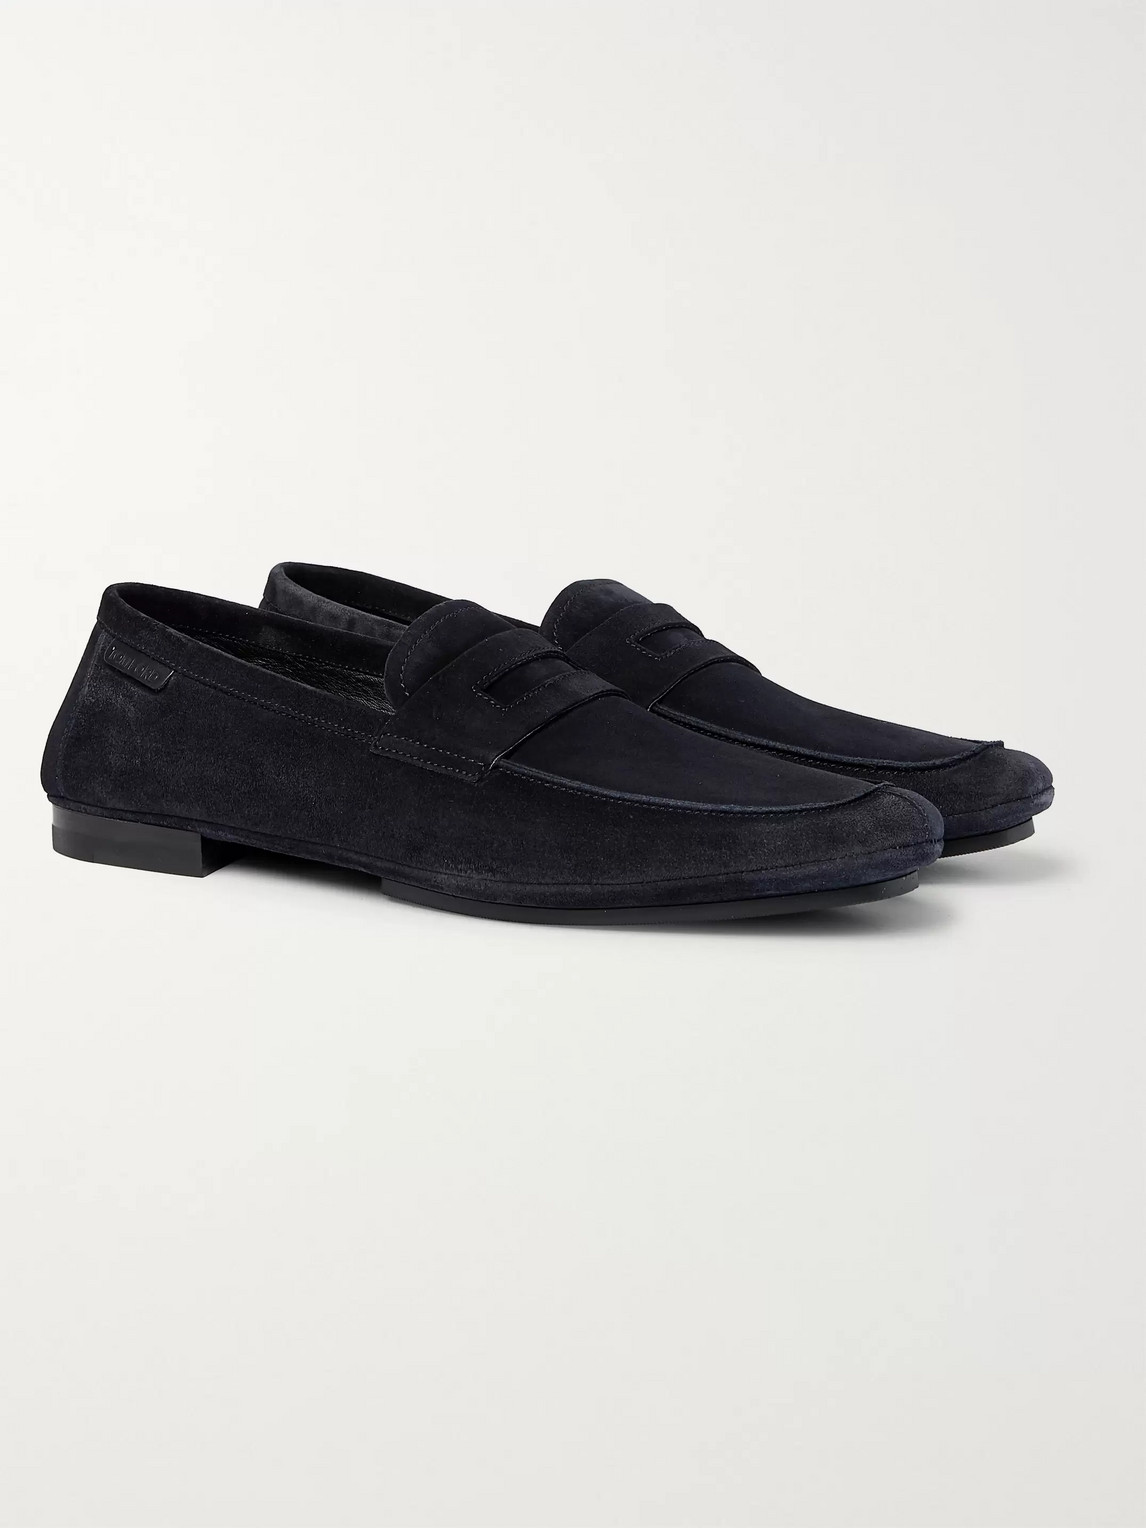 TOM FORD BERRICK SUEDE PENNY LOAFERS